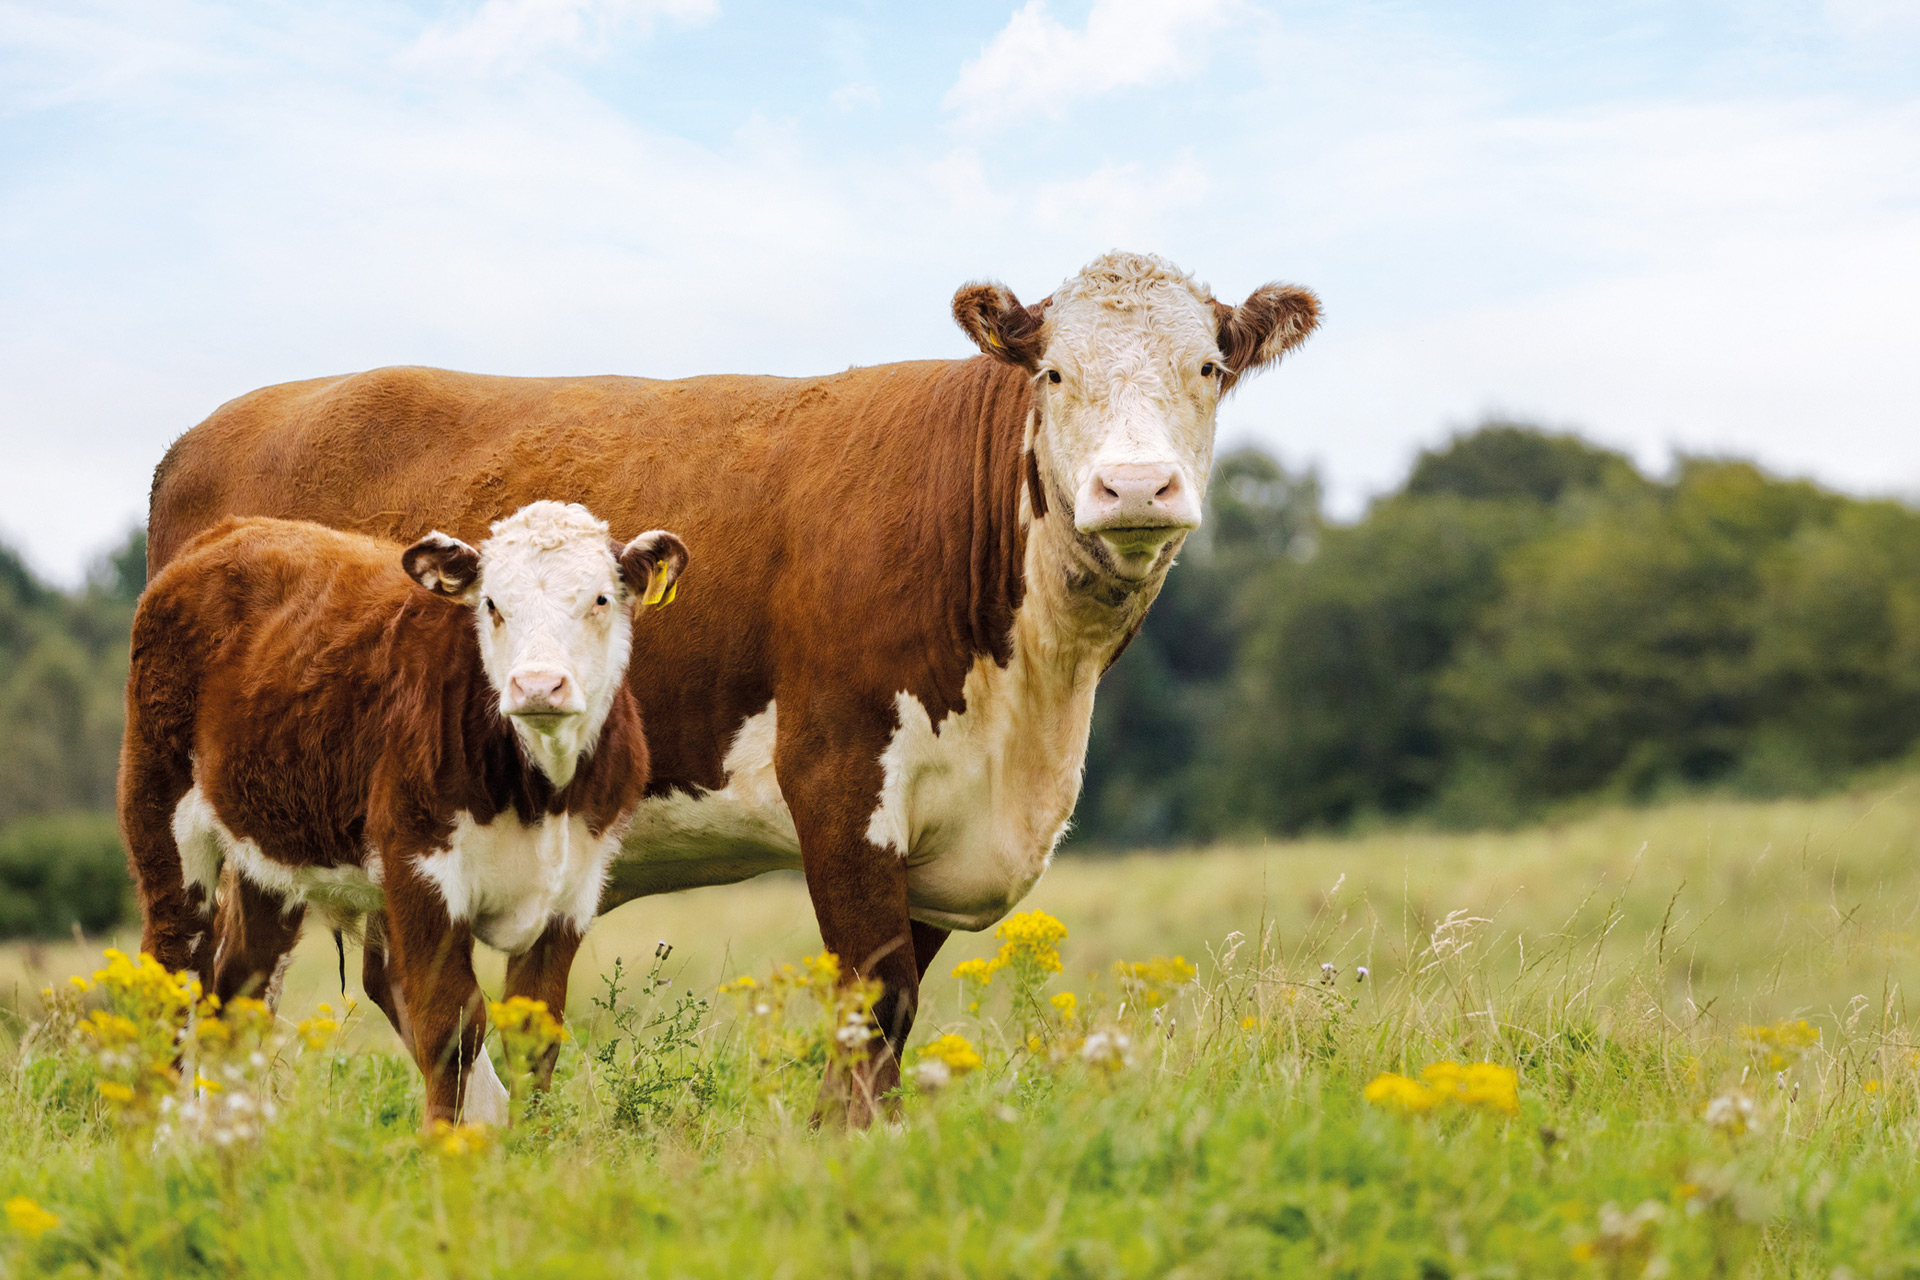 Brown cow and calf standing in field